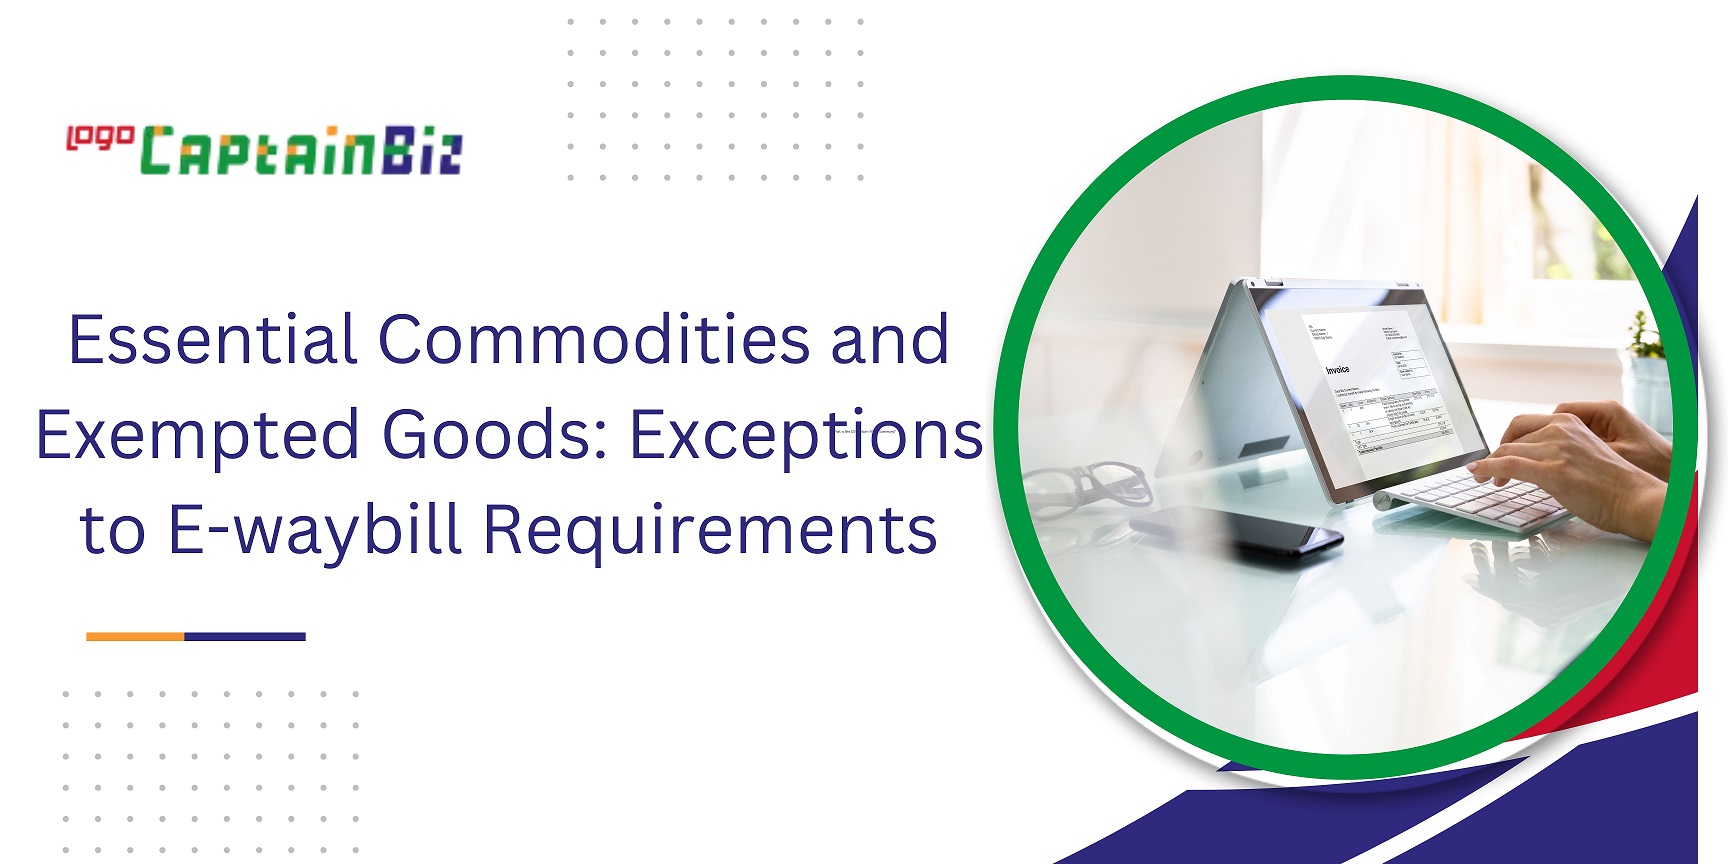 CaptainBiz: essential commodities and exempted goods exceptions to e-waybill requirements